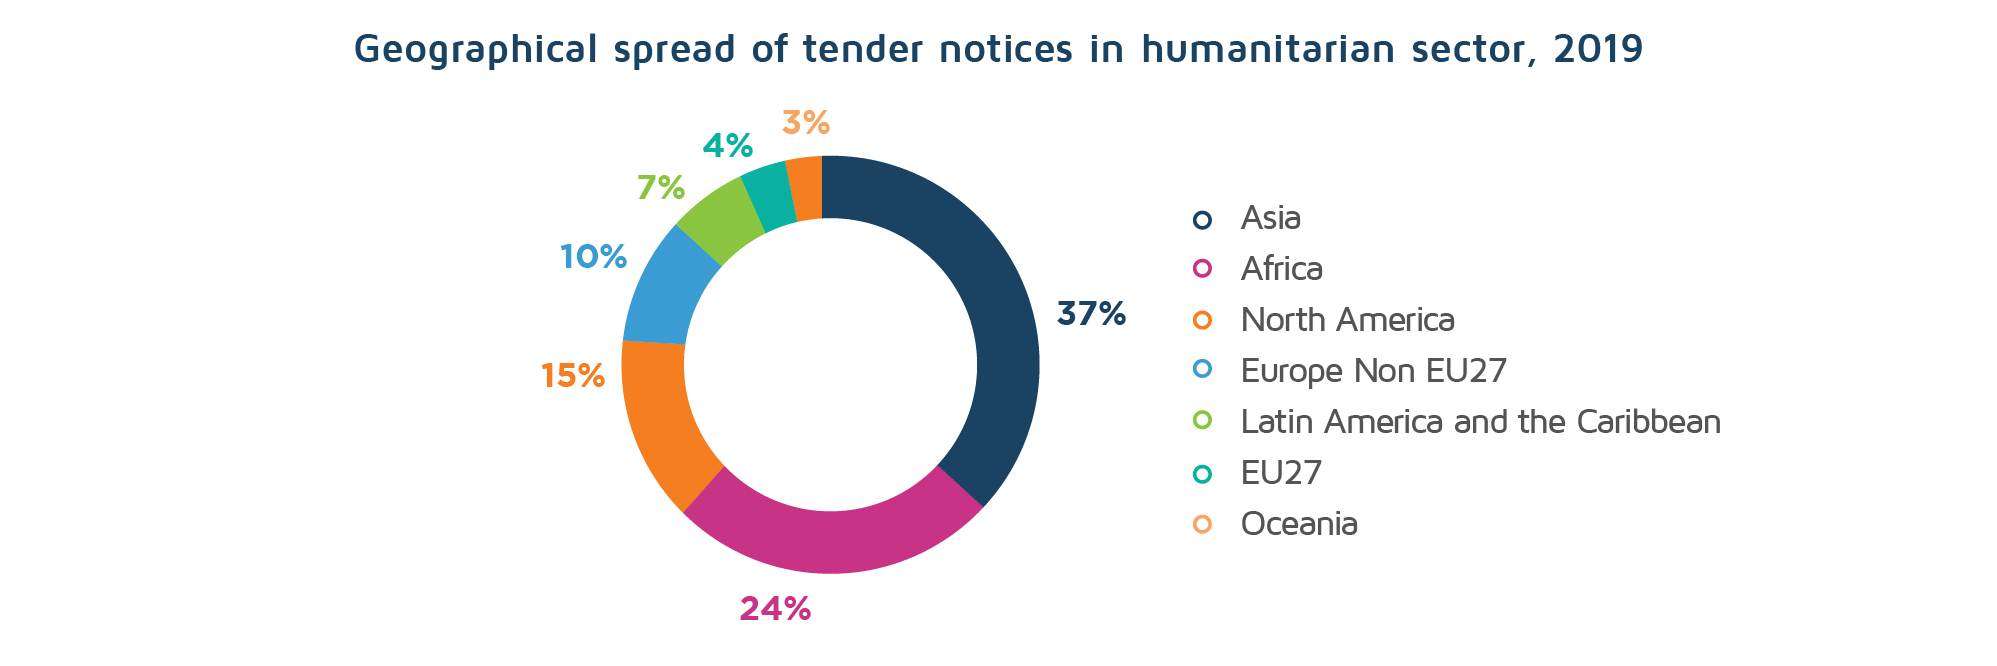 Geography of the tender notices in humanitarian sectors in 2019